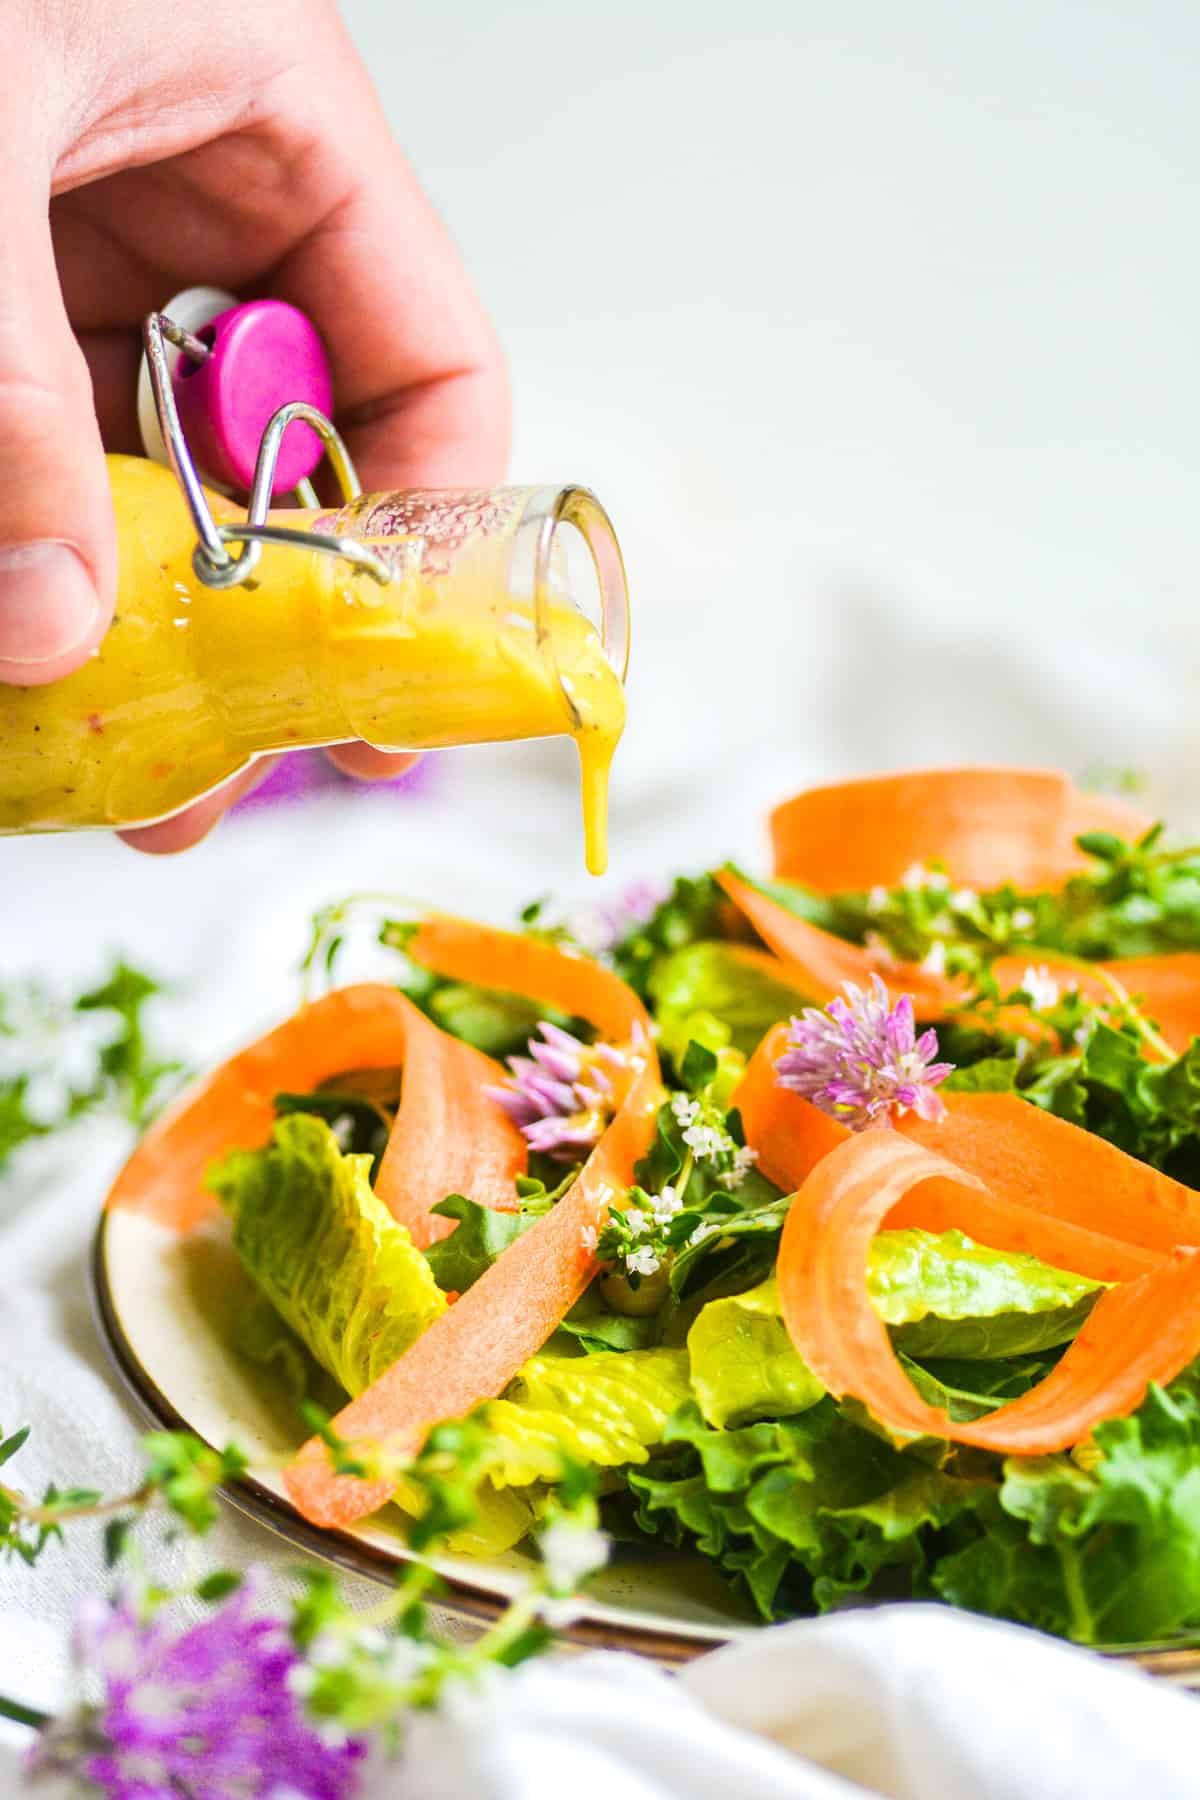 Pouring Vegan Honey Mustard Dressing onto a green salad on a plate.